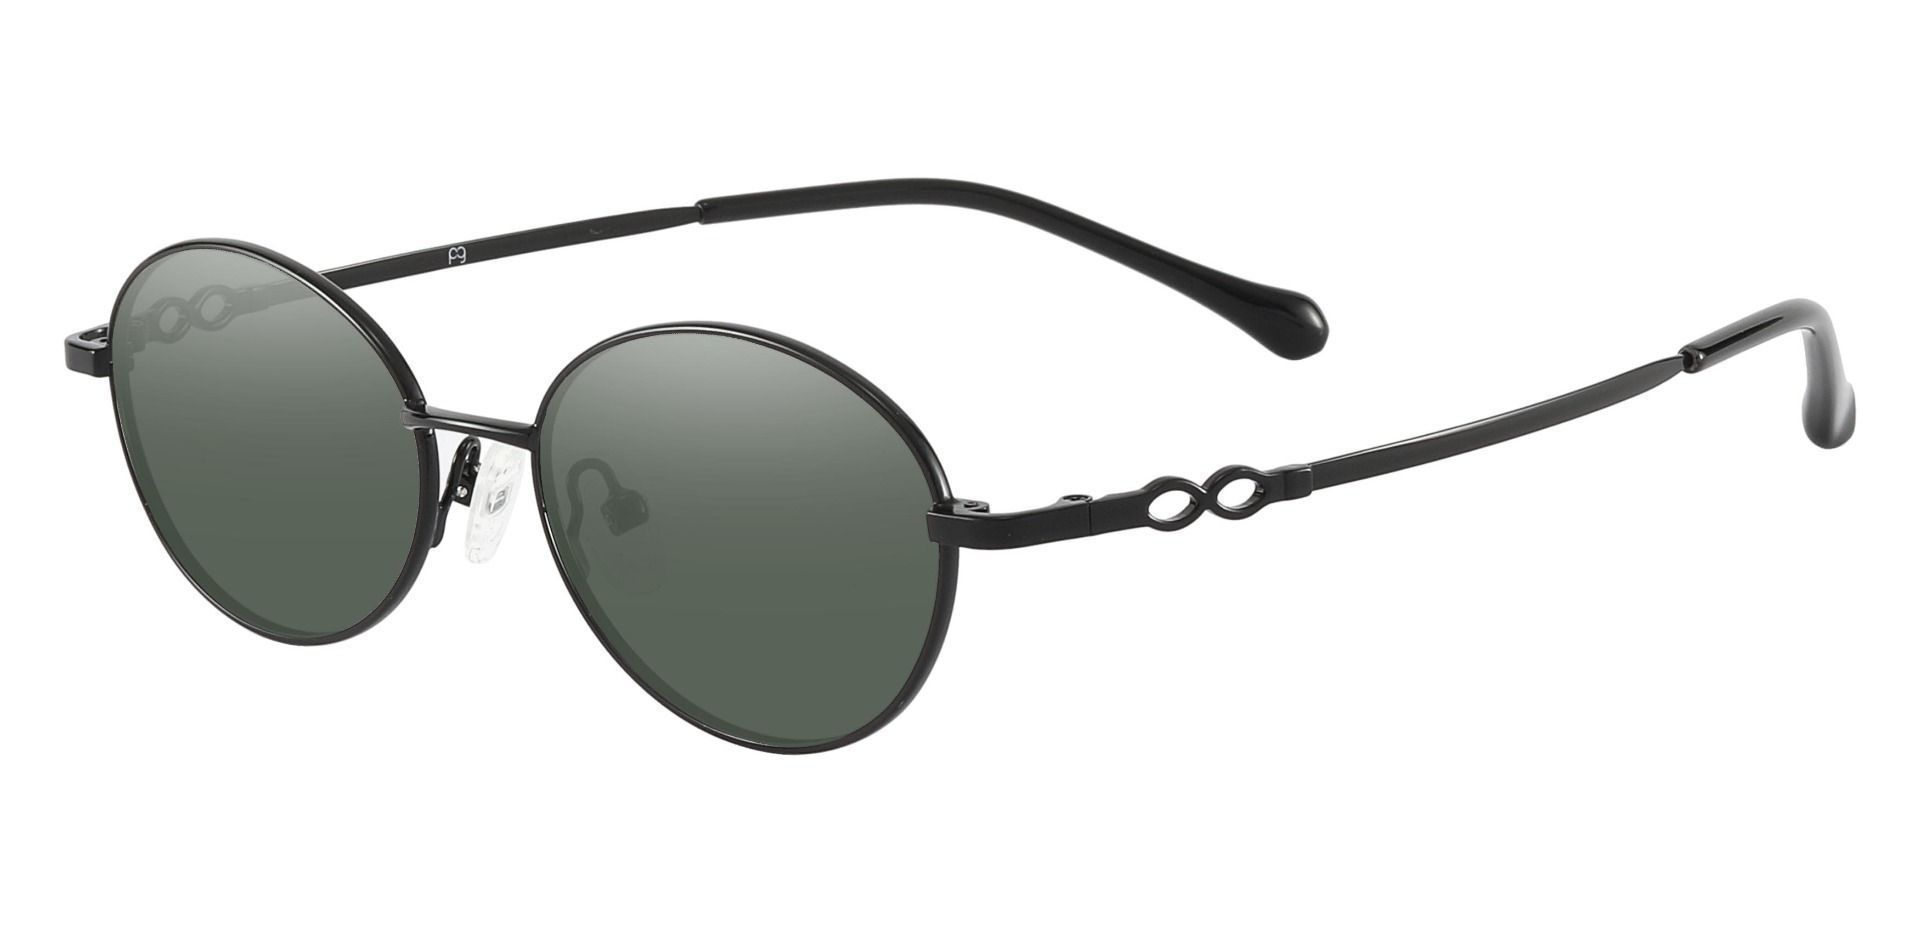 Odyssey Oval Reading Sunglasses - Black Frame With Green Lenses